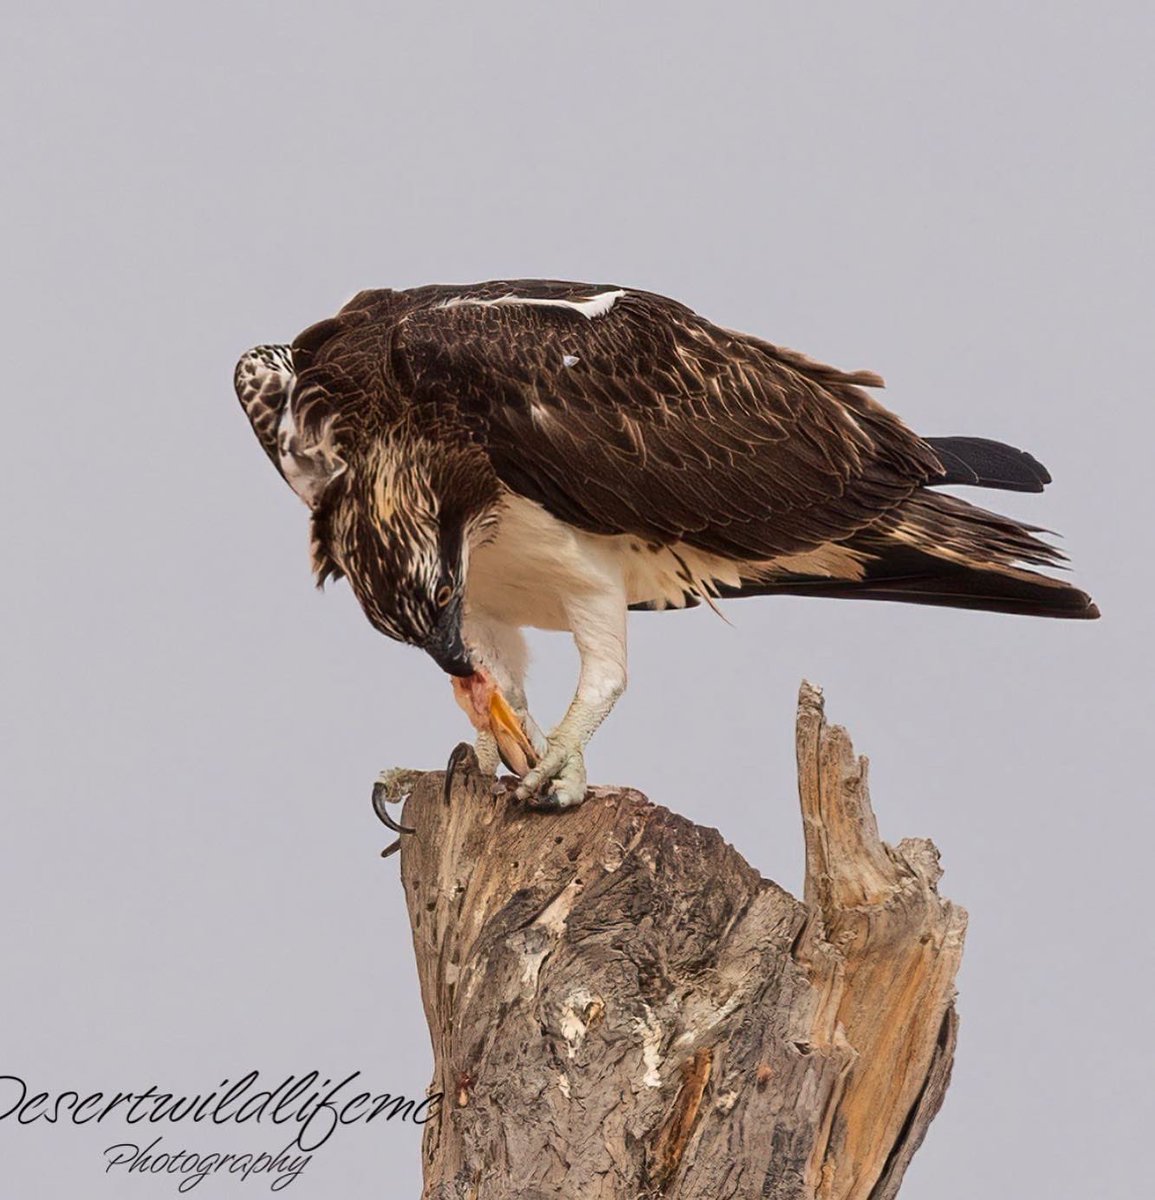 Some Osprey action this afternoon. From the hunt the transport and the meal, full package 😂 #uaebirds  #birds_nature #birdwatching #birdstagram
#birdlovers #wildlifephotography 
#canonbirds  #birdphotography 
#feather_perfection #birds
#birdsofinstagram